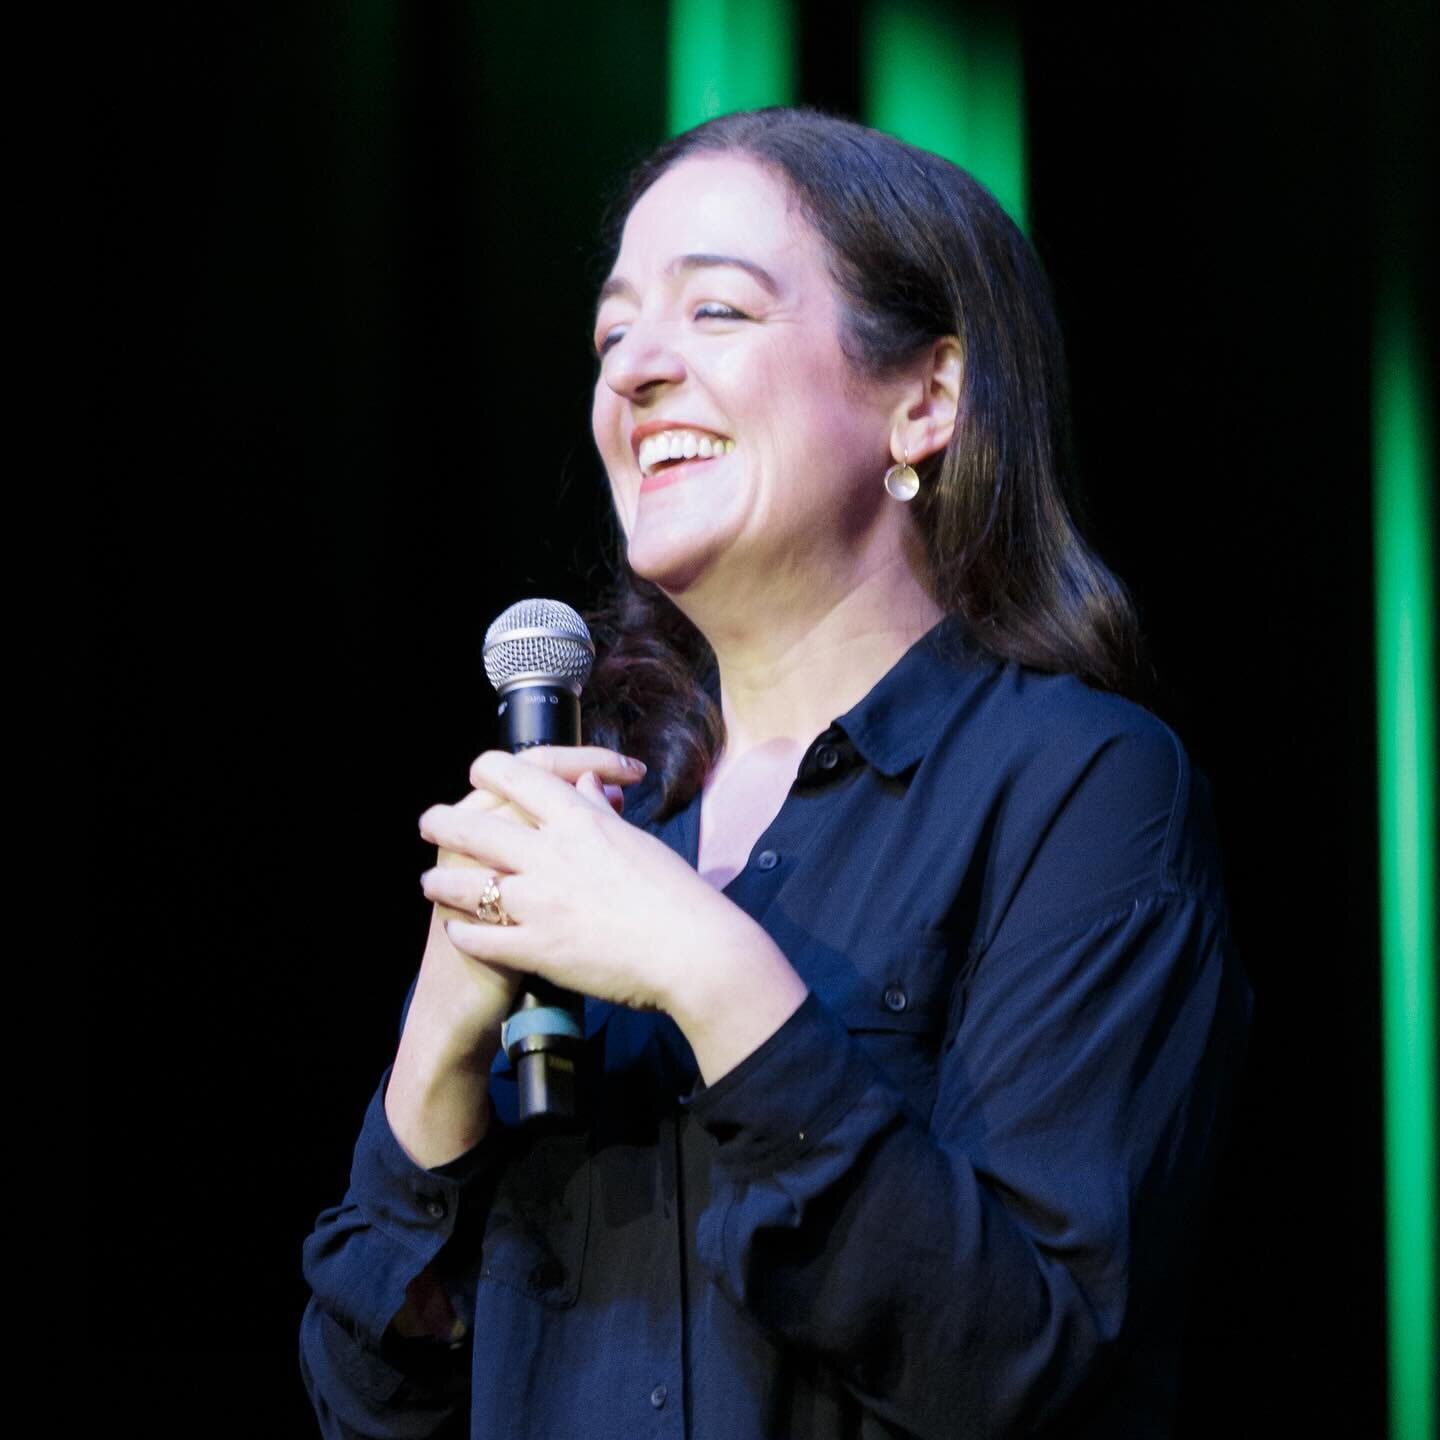 #Throwback to @maeveinamerica on stage last October and @eugenemirman enjoying it a lot! Photos by @ilyamirman. #tbt Listen to Maeve&rsquo;s album, A Very Special Woman, at the link in our bio!